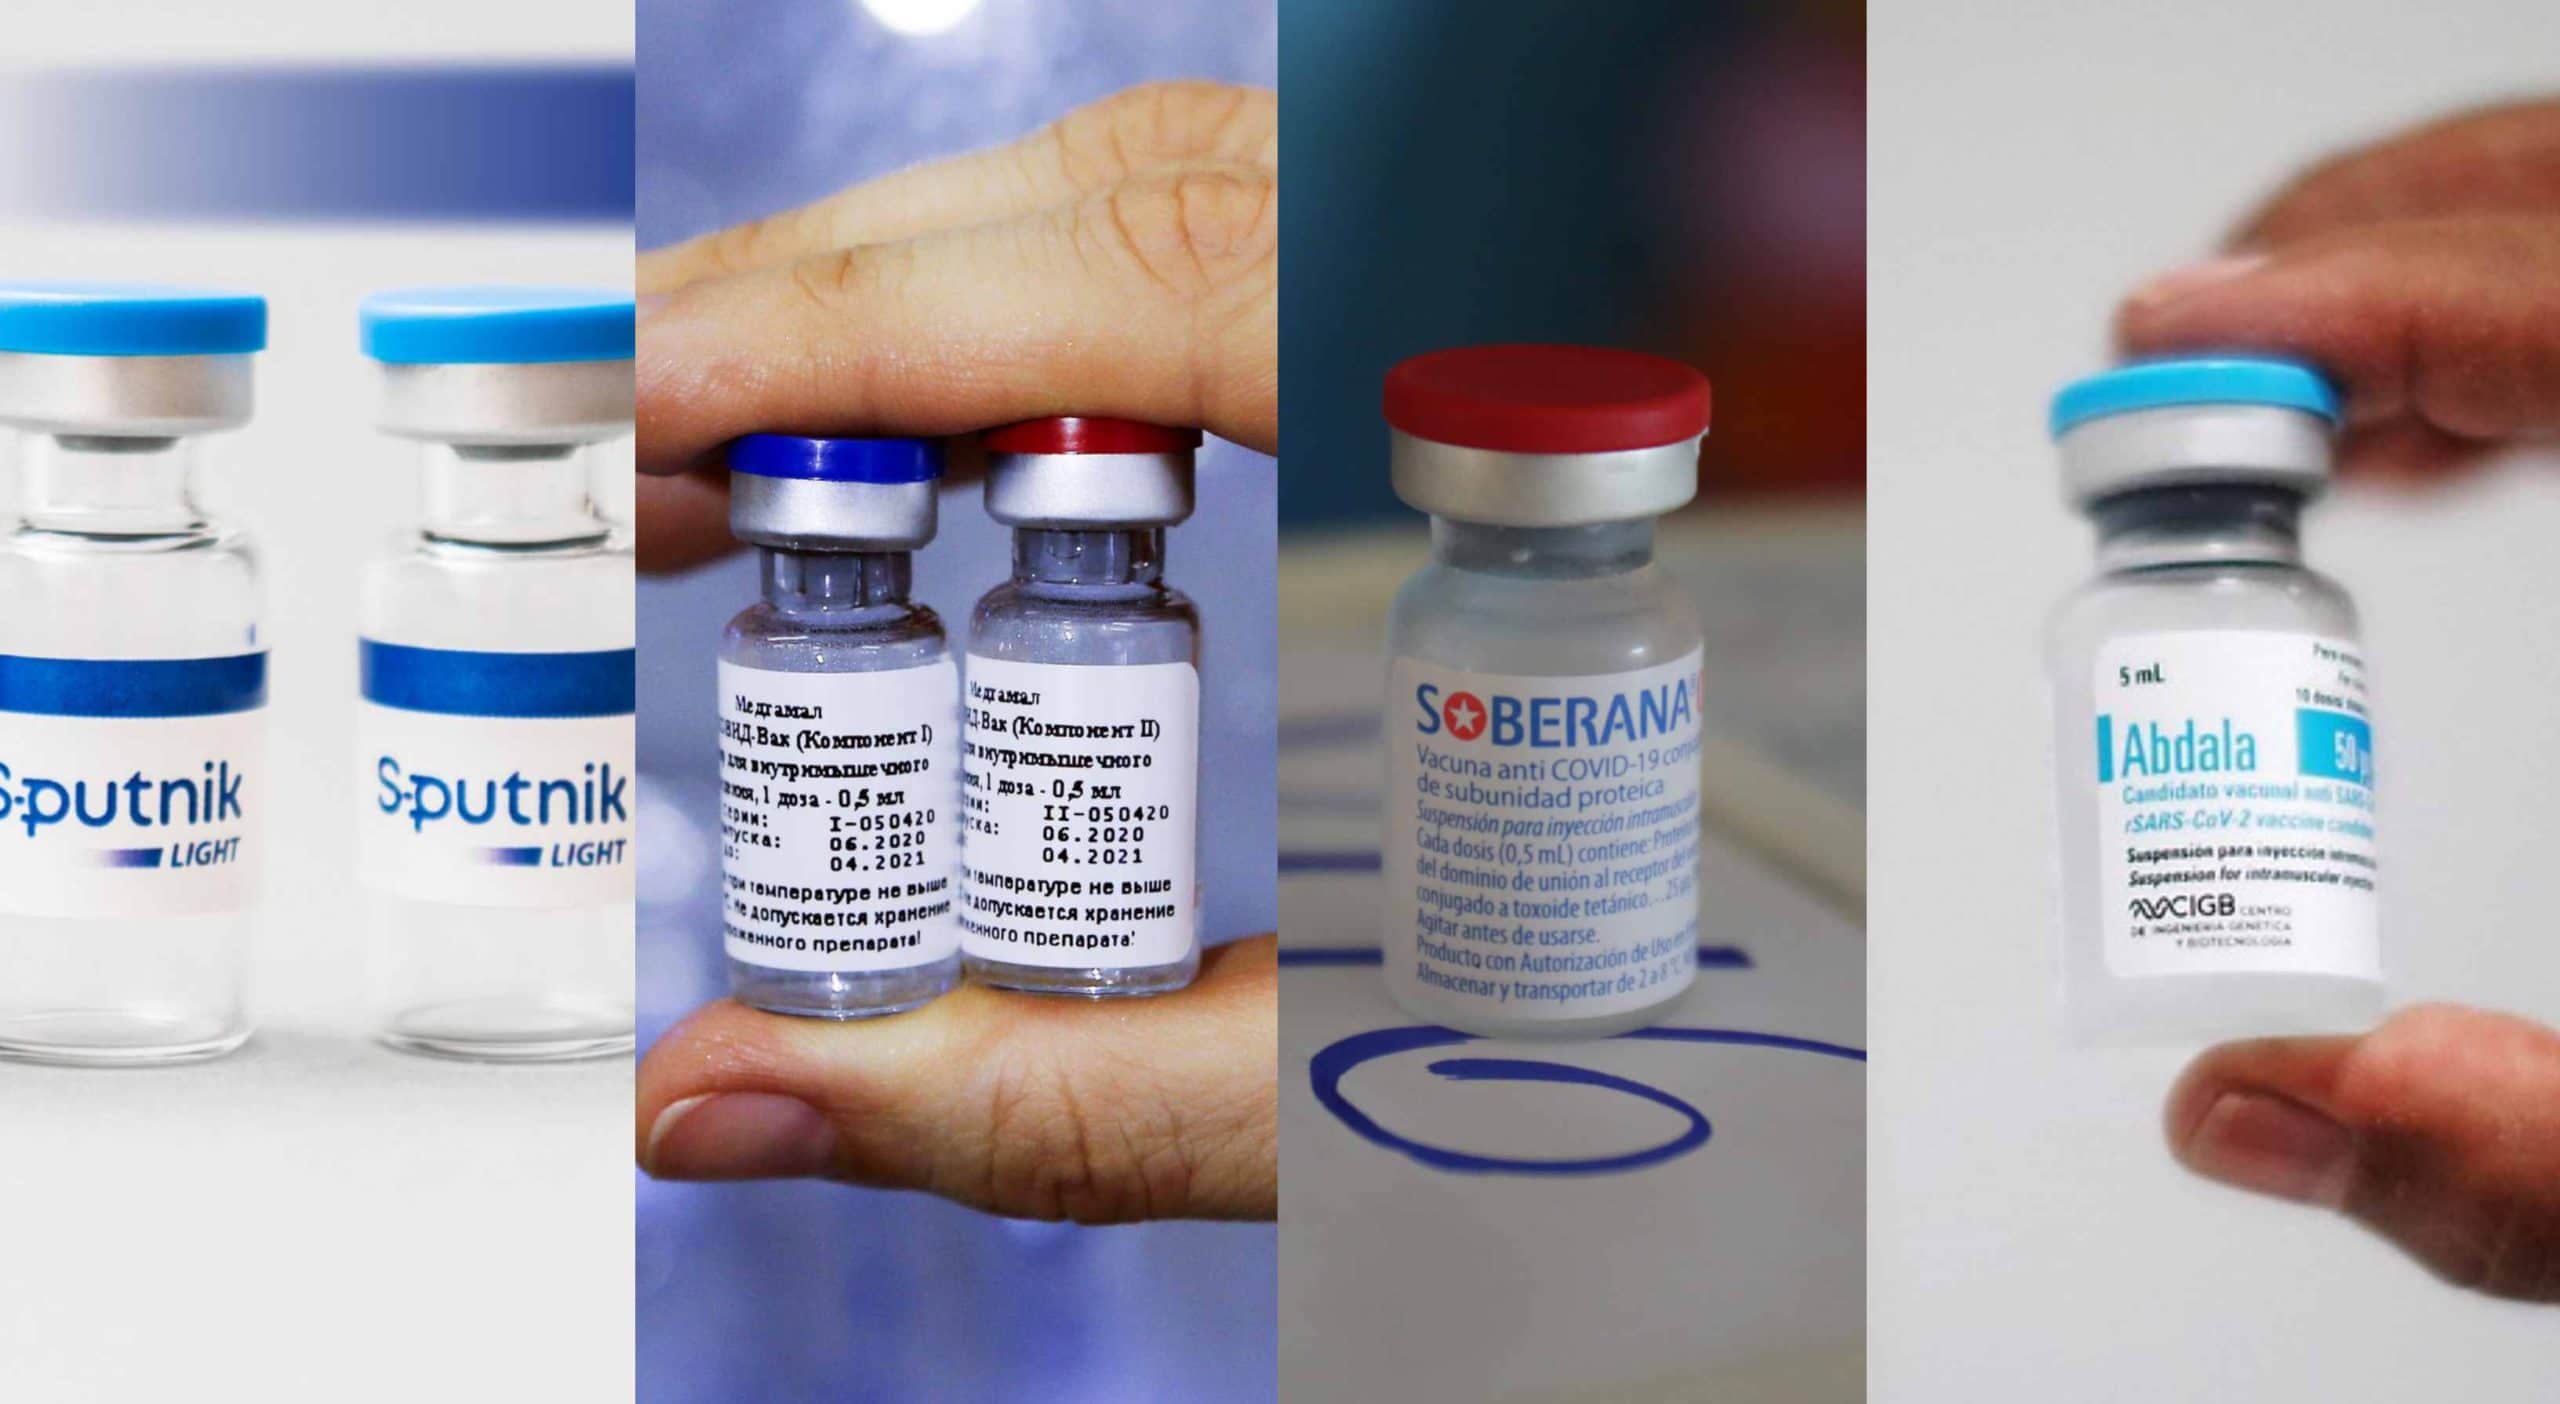 Russian and Cuban vaccines were more expensive: Ortega paid USD 100 million to his allies